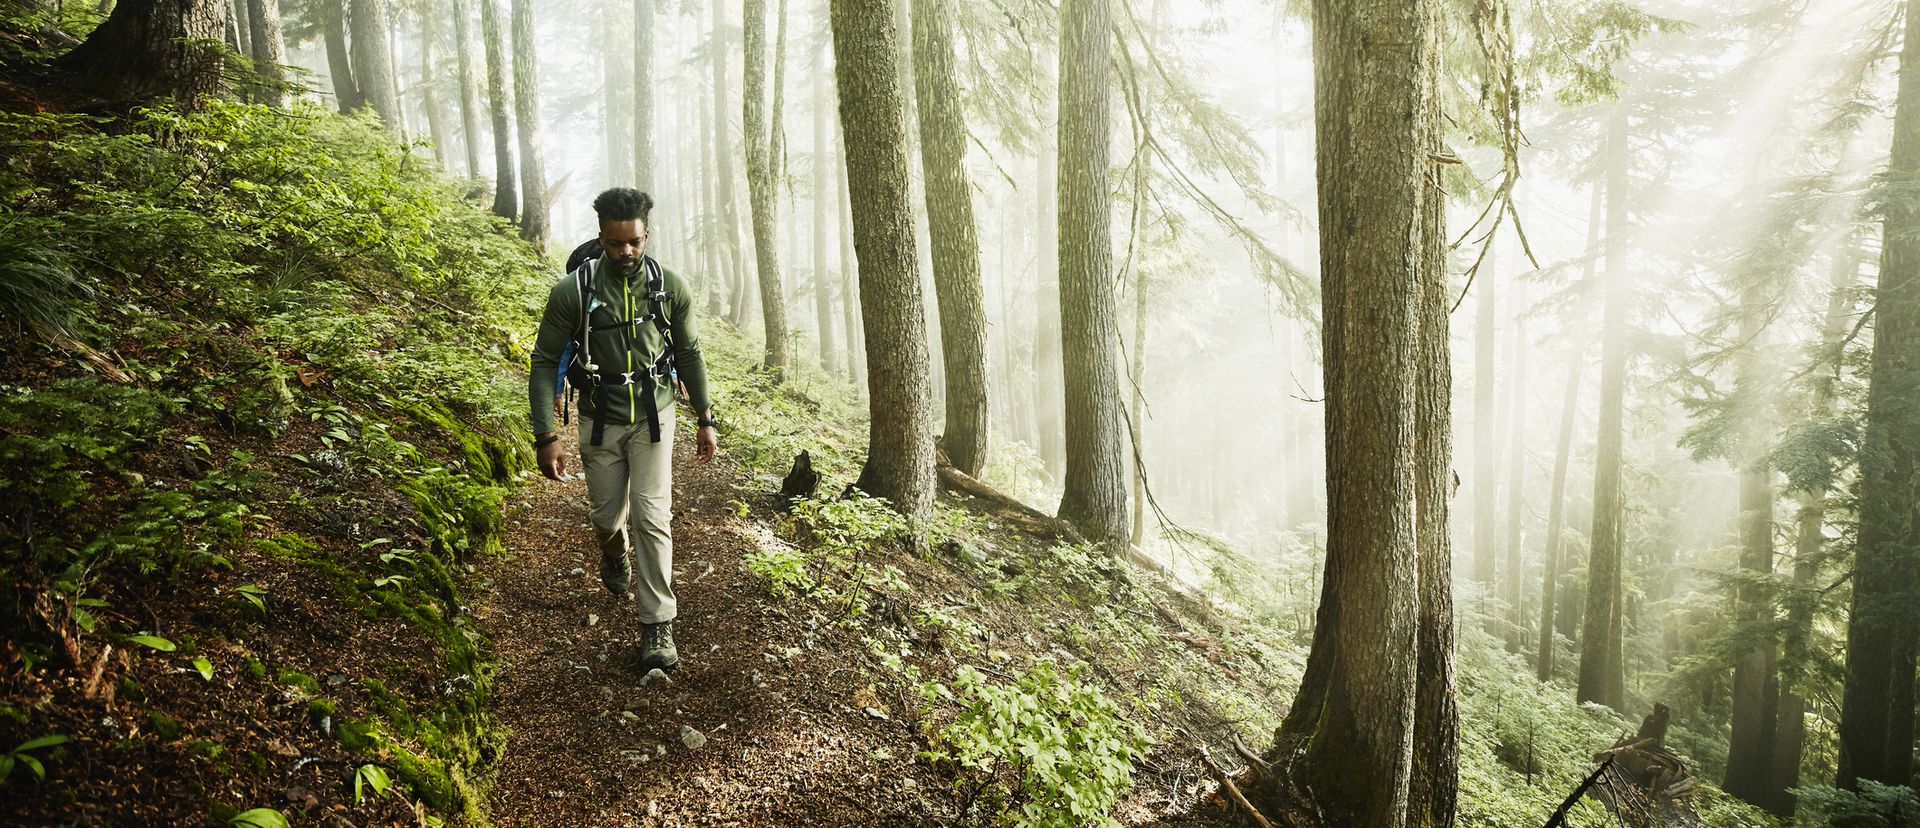 Man hiking along trail in forest on foggy morning